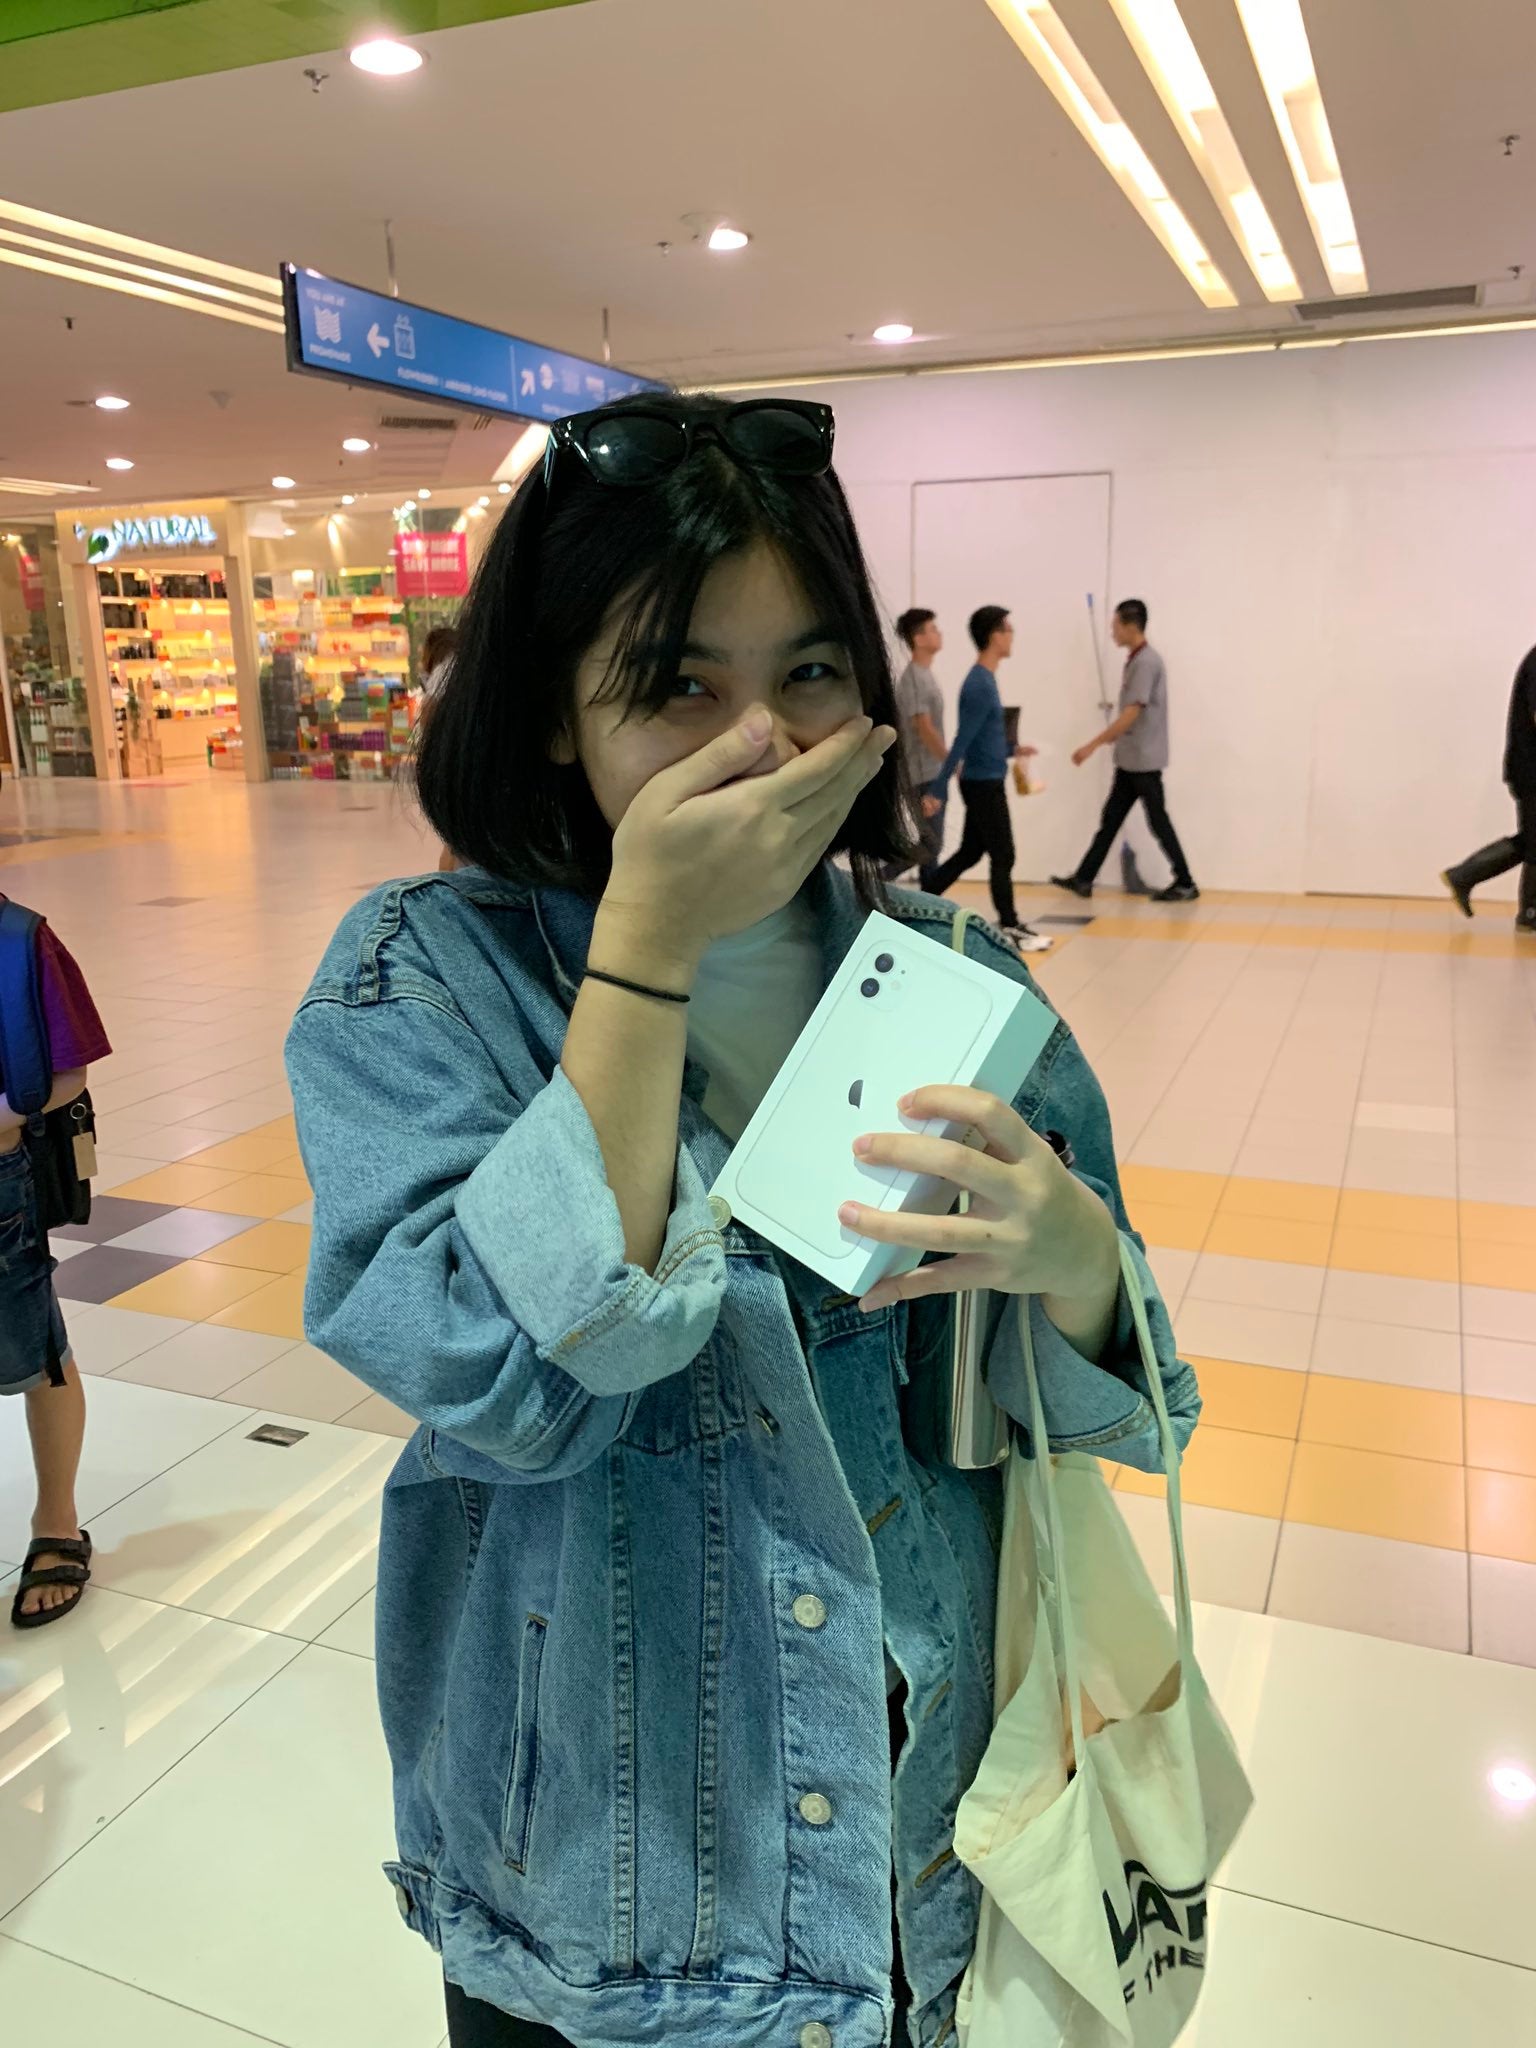 M'sian Girl Receives New iPhone 11 From Guy Best Friend After Her Old Phone Screen Cracks - WORLD OF BUZZ 2